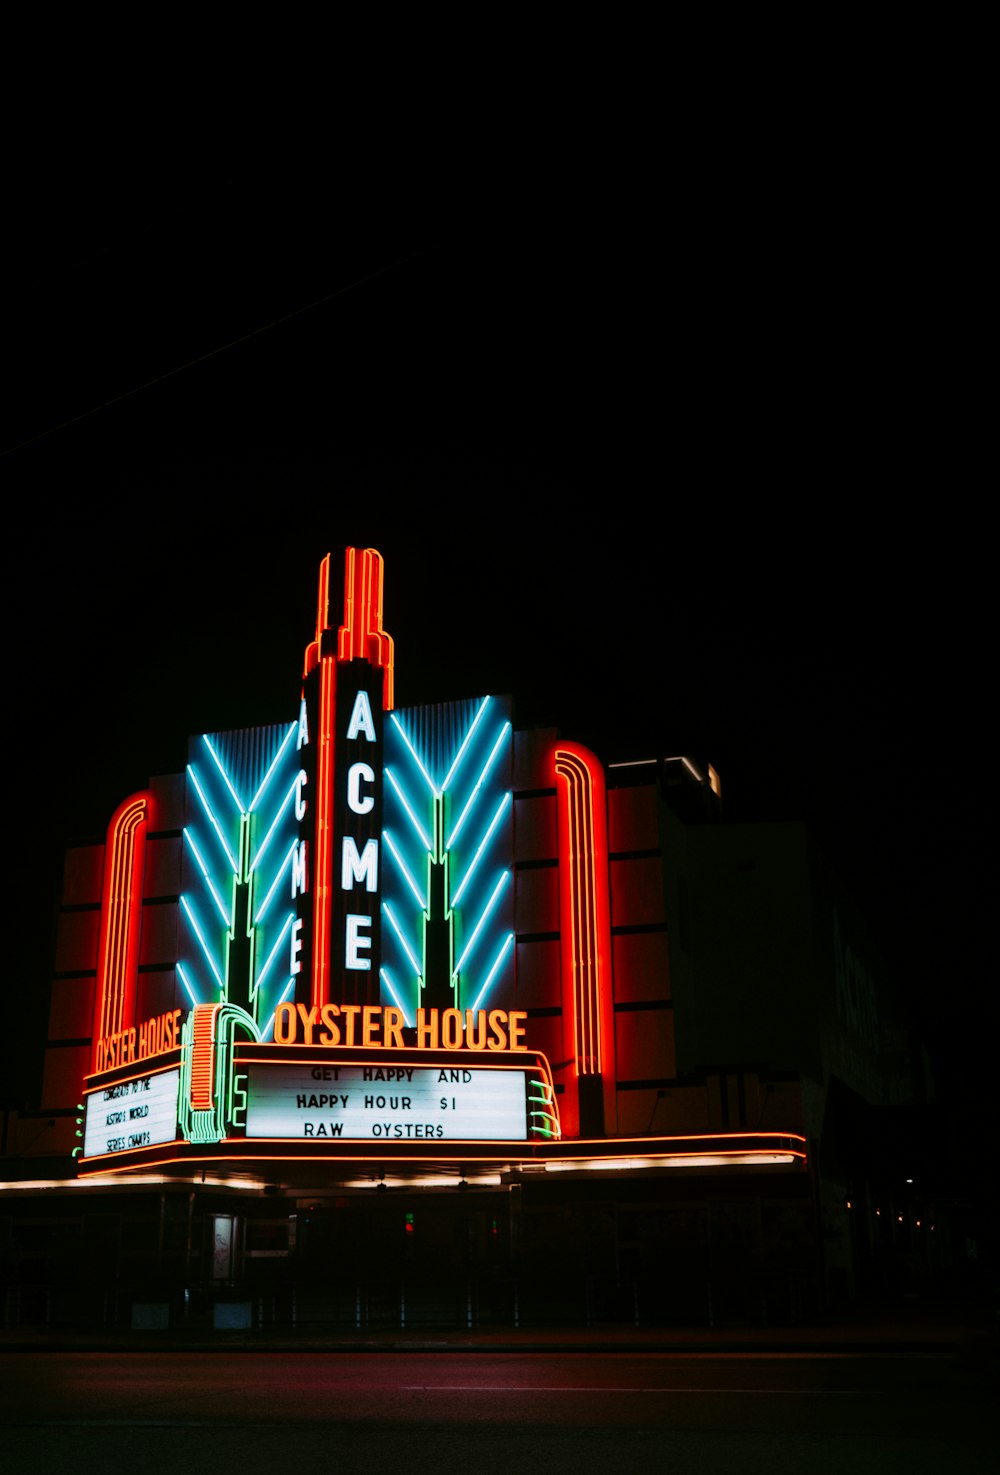 a building with neon signs at night